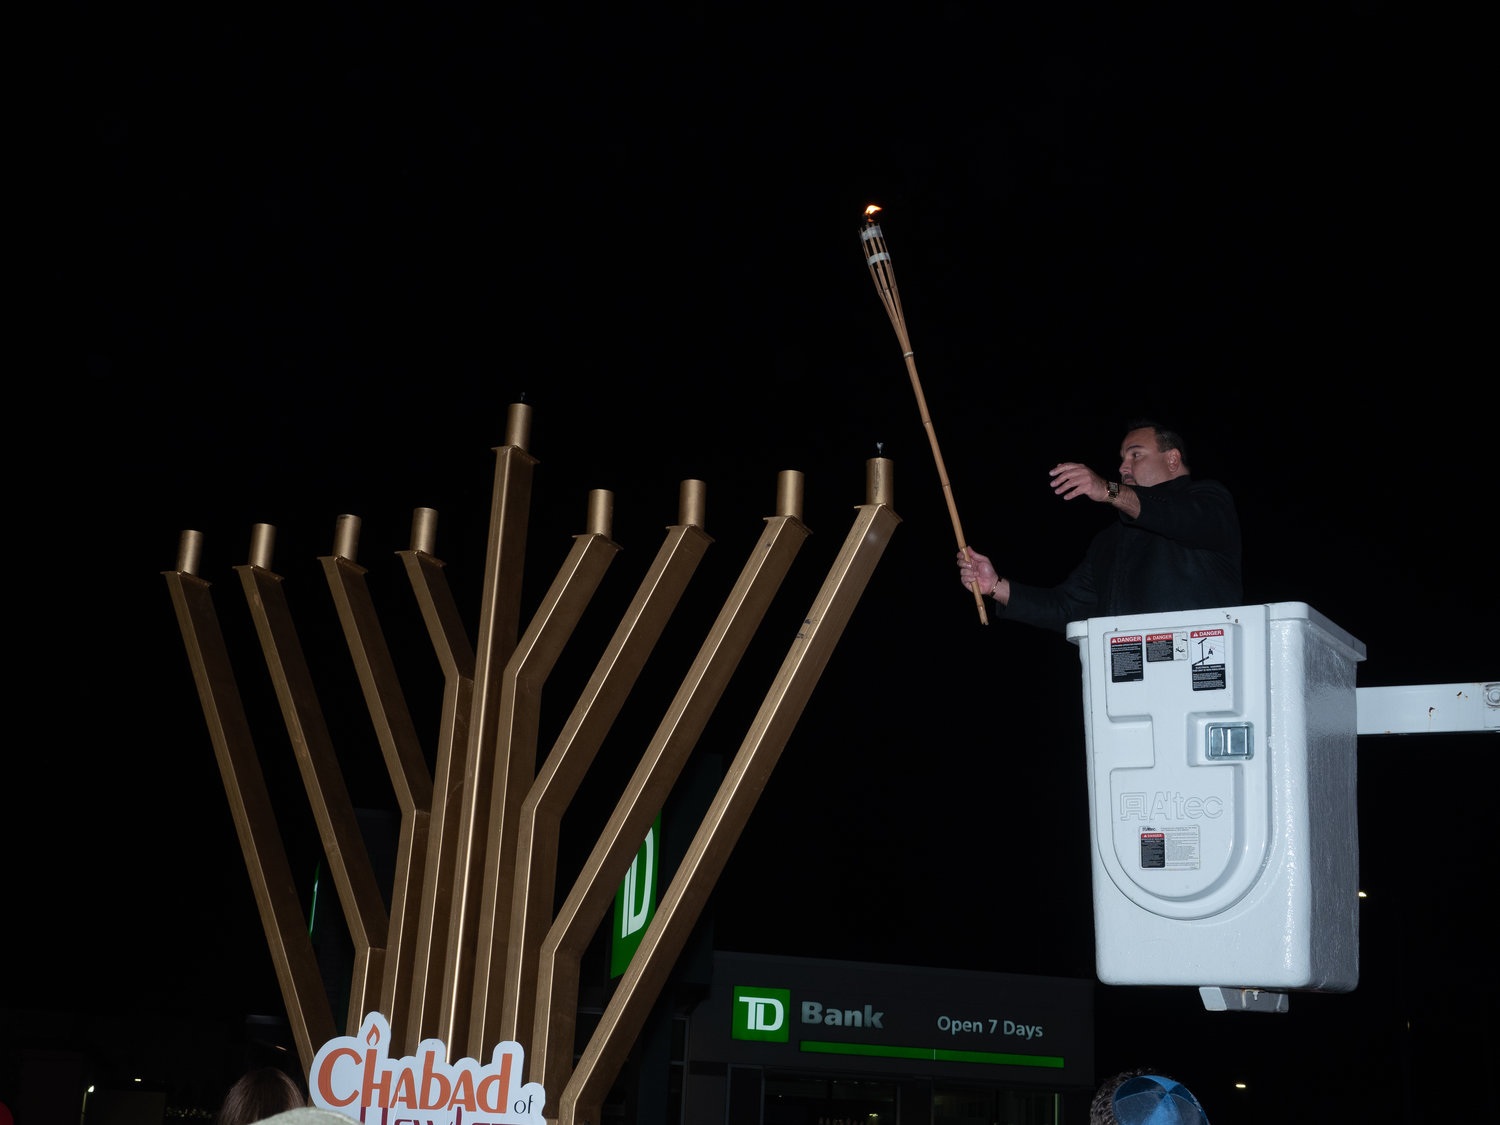 The Hewlett-Woodmere Business Association hosted its annual Hanukkah celebration lighting on Sunday, the first night of the eight-day Jewish holiday. Steve Bouskila lit the menorah.